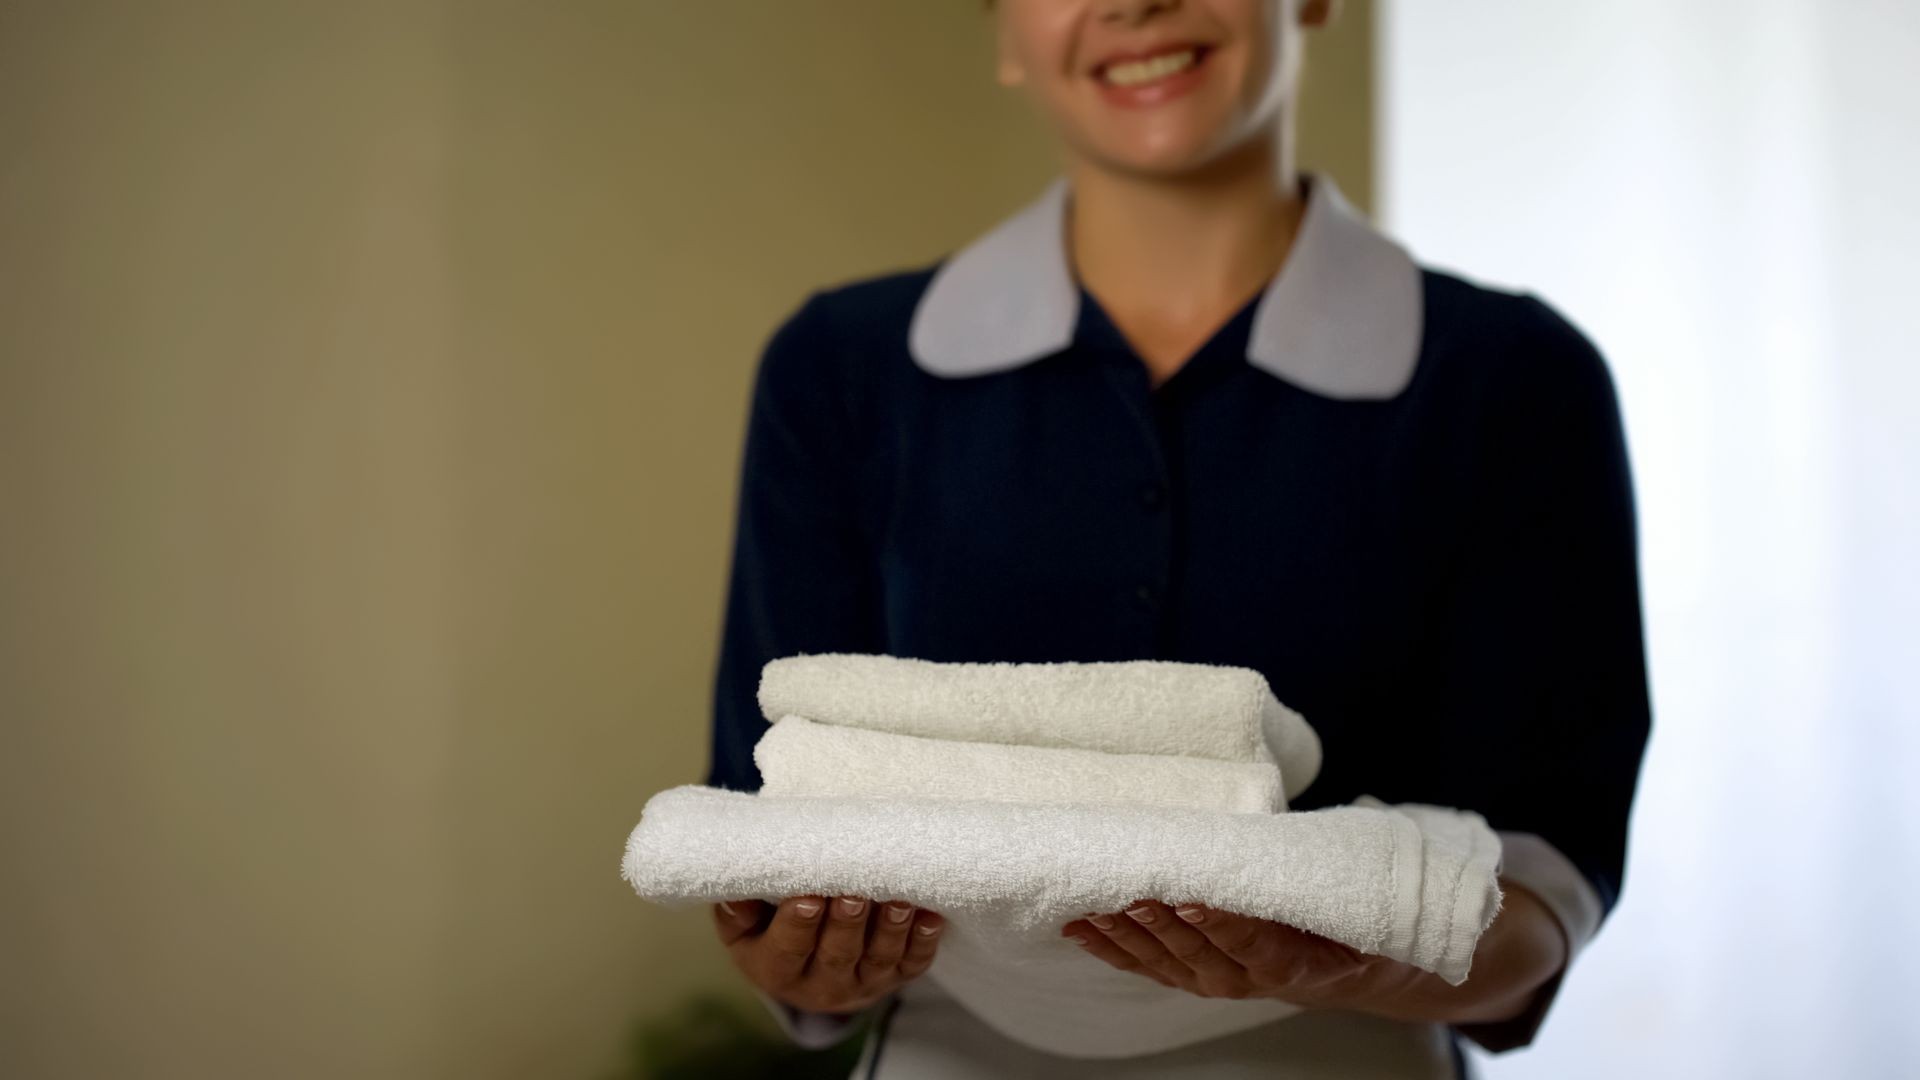 Smiling hotel worker showing clean pillows, good housekeeping, health standard